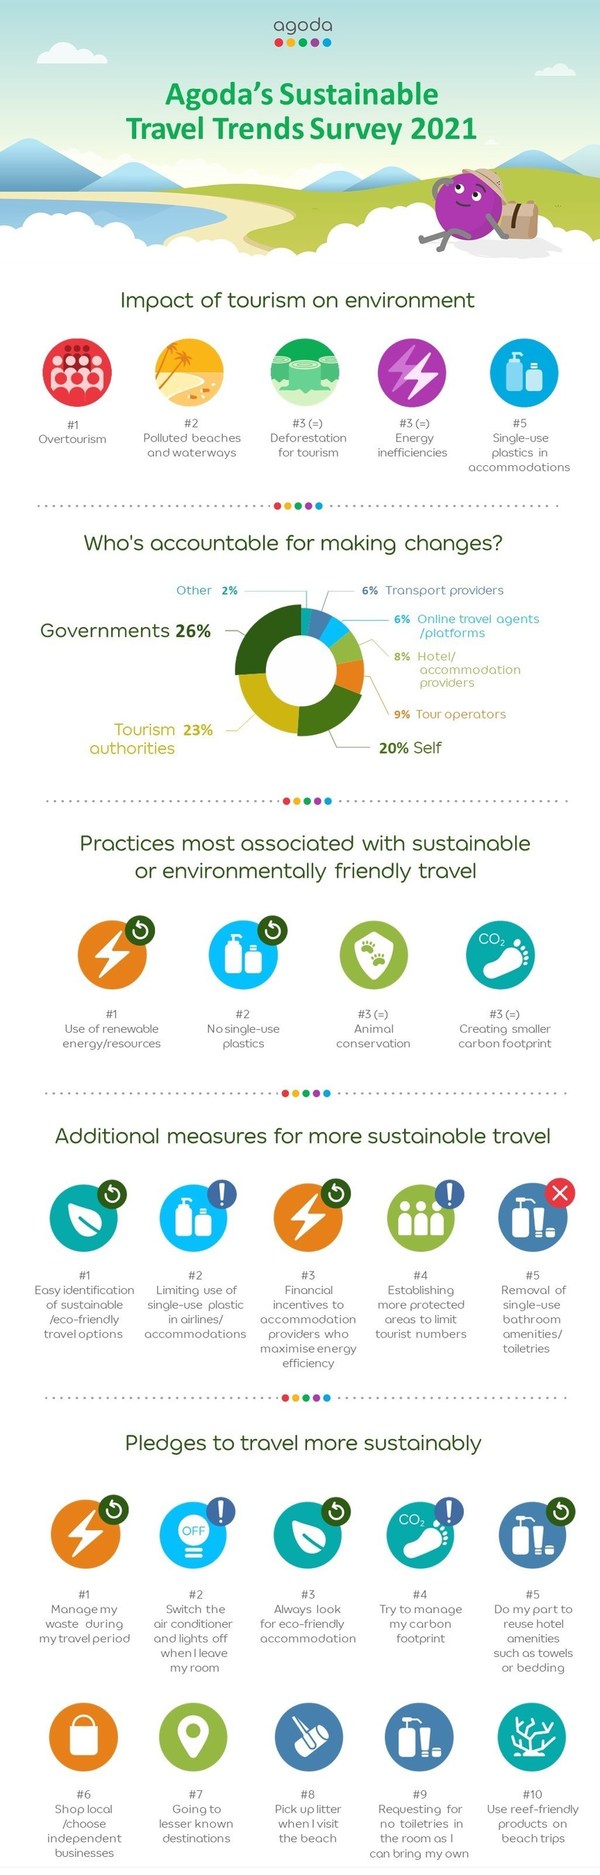 Agoda Sustainable Travel Trends Survey reveals people's top concerns about tourism's impact, and measures to make travel more sustainable